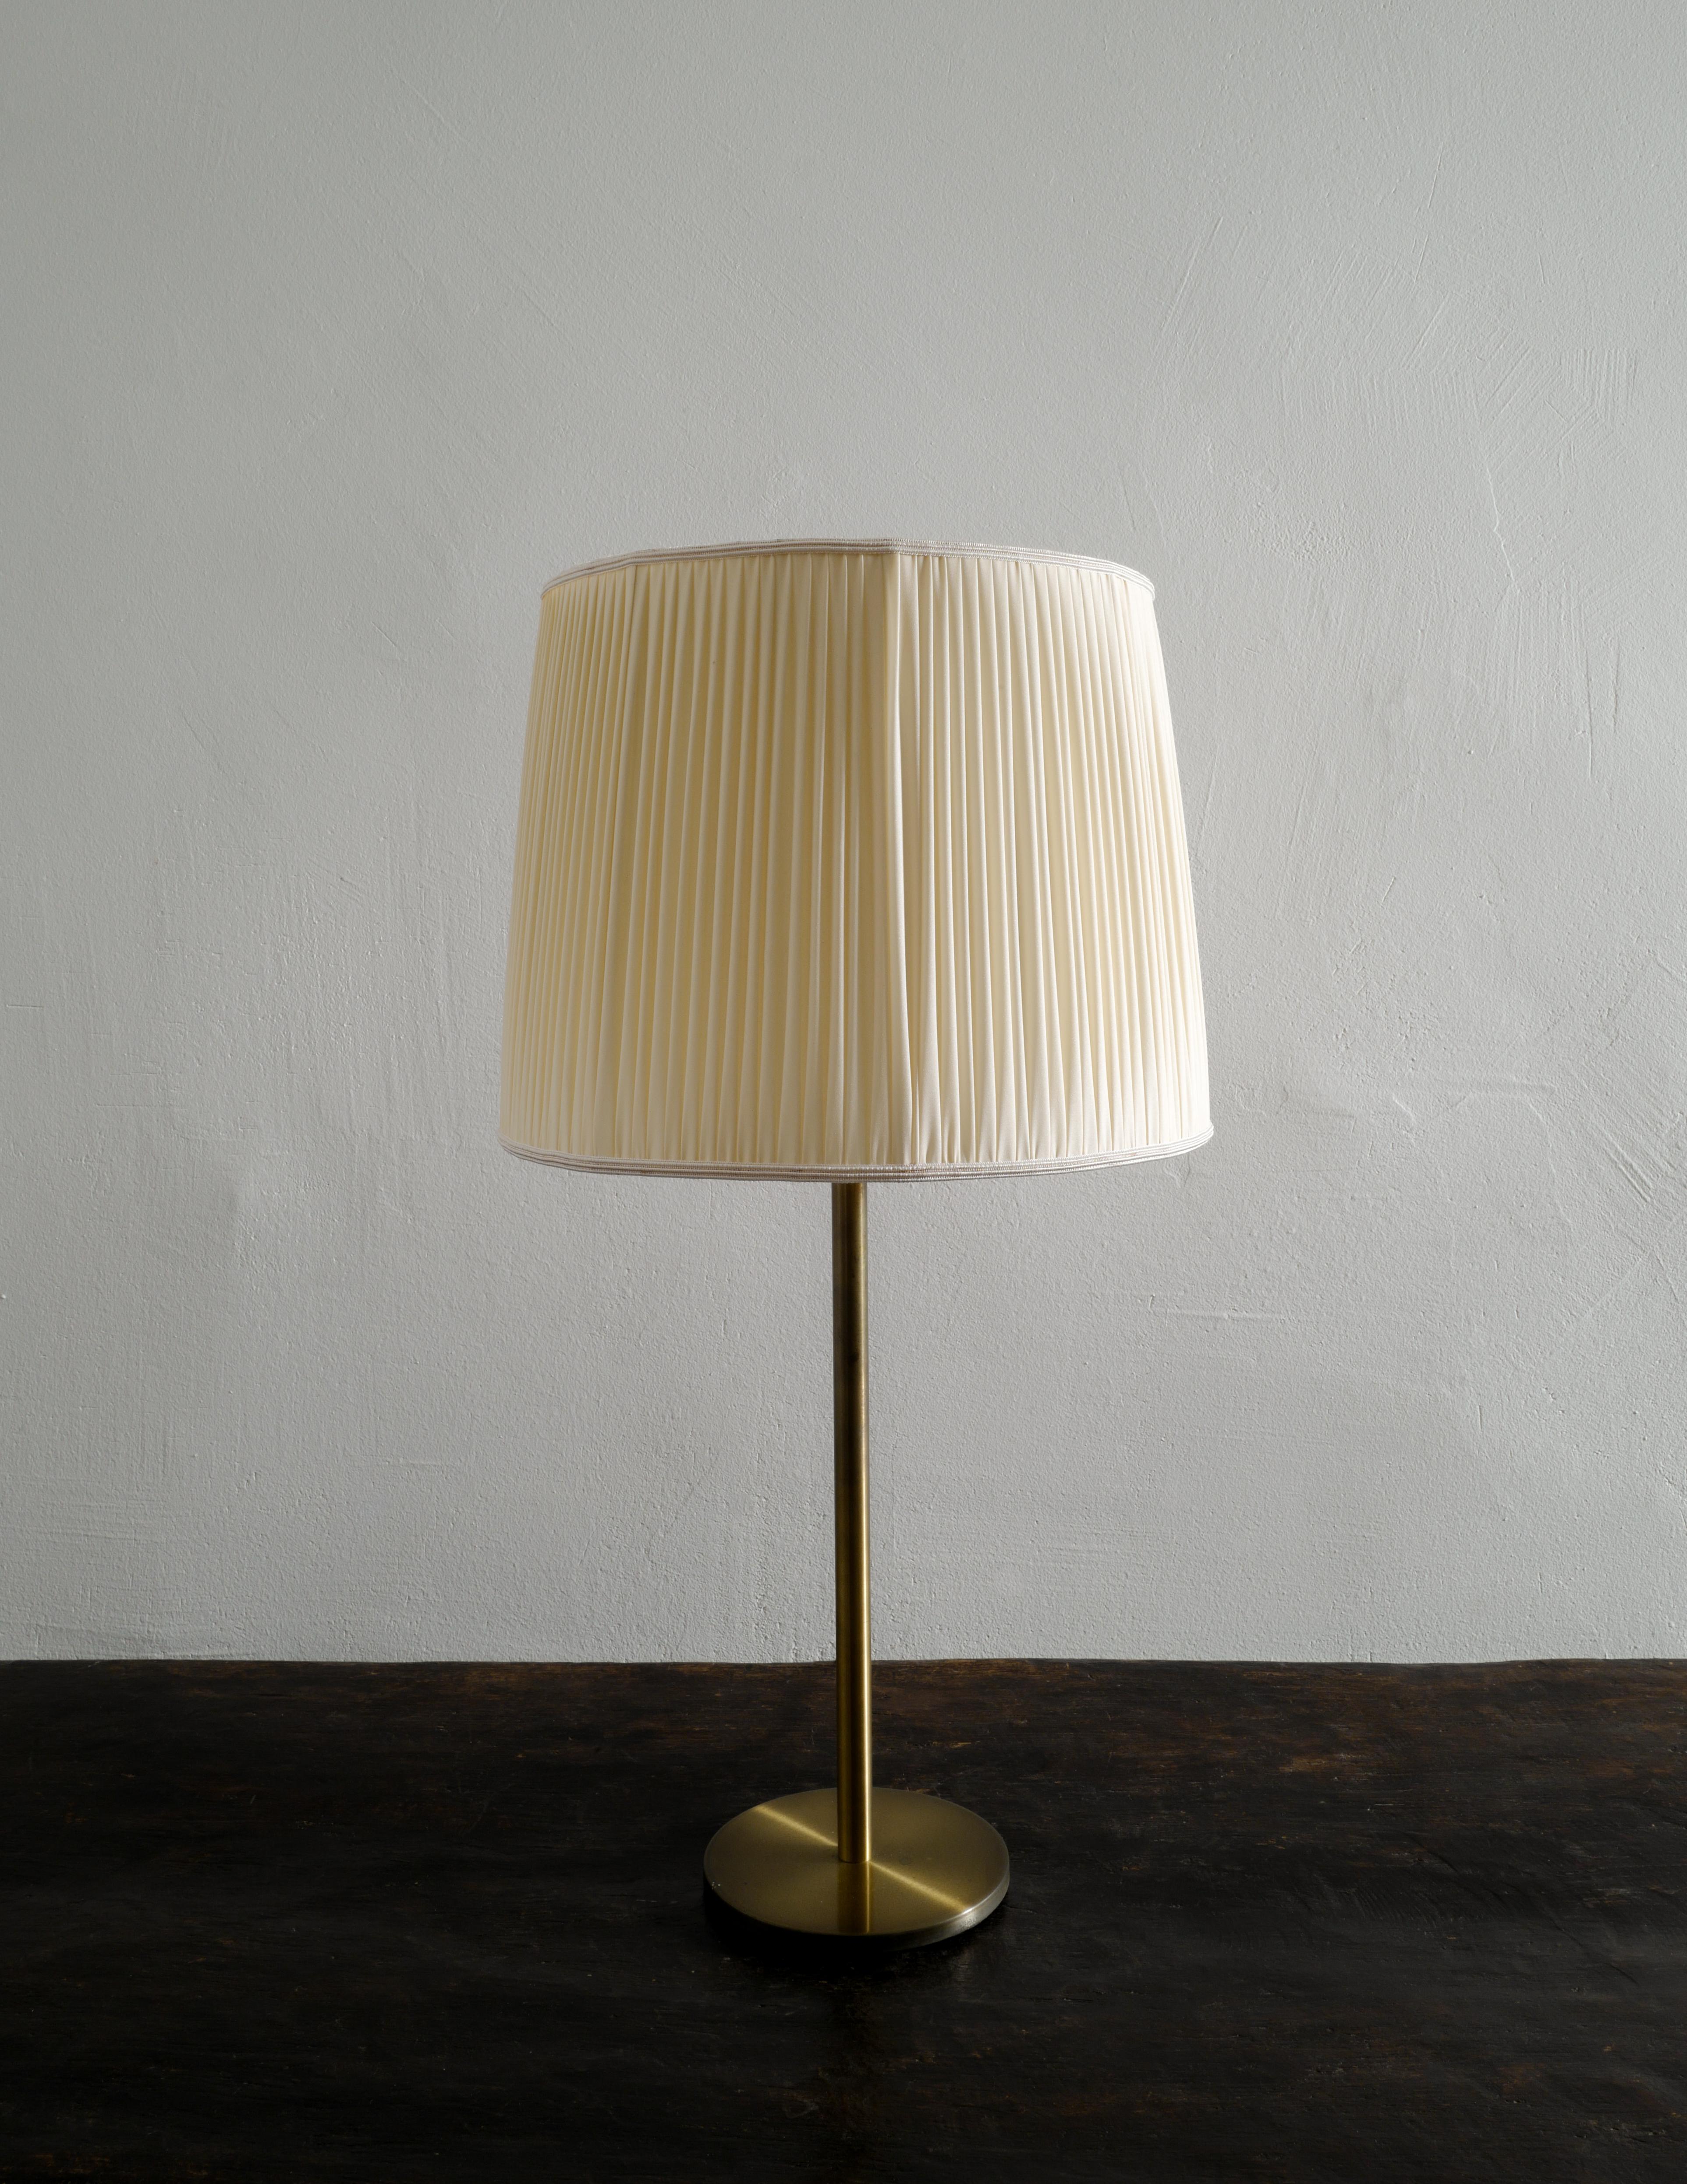 Rare Swedish mid century table / desk lamp designed by Östen & Uno Kristiansson and produced by Luxus Vittsjö, Sweden 1960s. In good vintage and original condition with small signs from age and use. Original shade is included in the purchase.